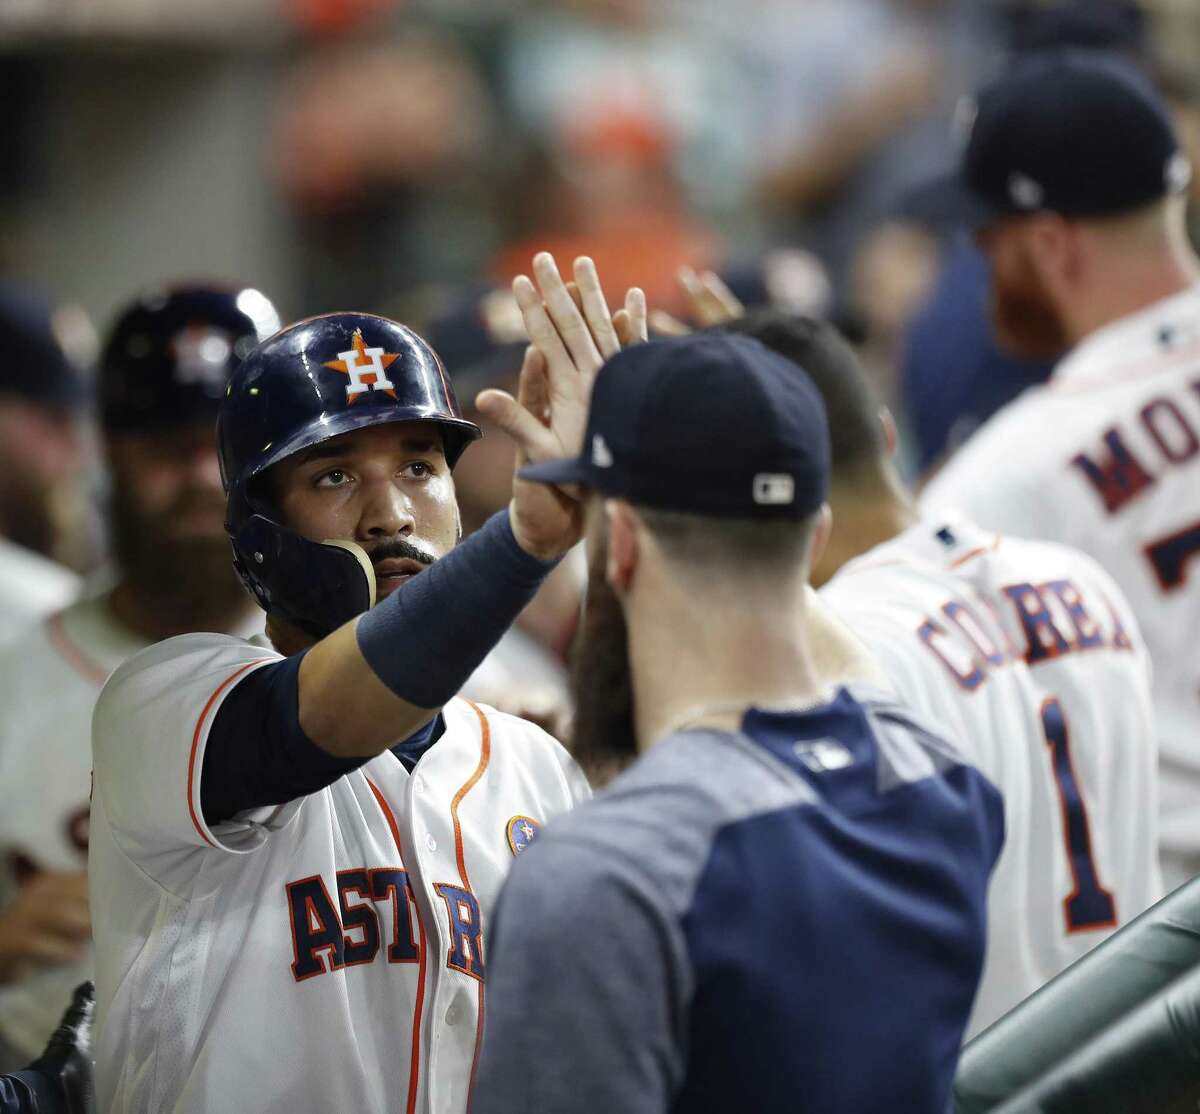 Astros’ Marwin Gonzalez (left) celebrates his run scored on Yuli Gurriel’s RBI double during the fourth inning against the Chicago White Sox at Minute Maid Park on Sept. 20, 2017, in Houston.